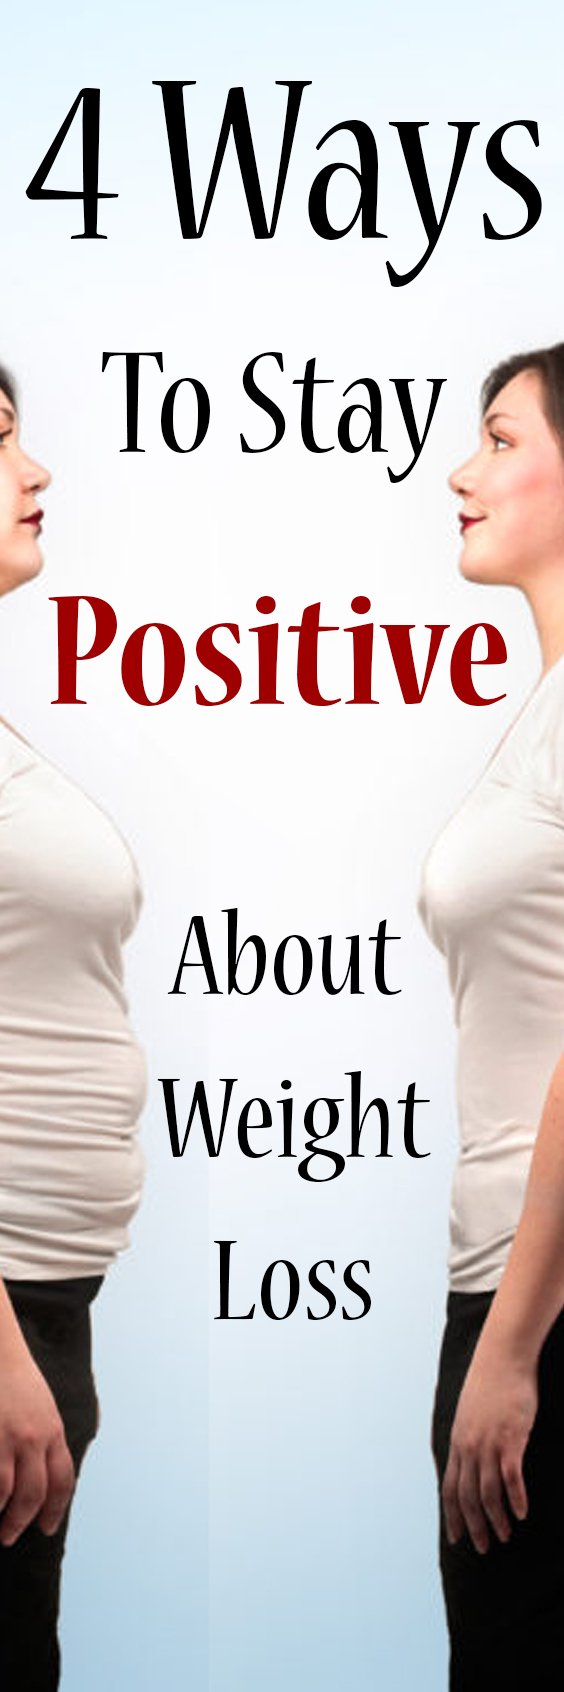 4-ways-to-stay-positive-about-weight-loss